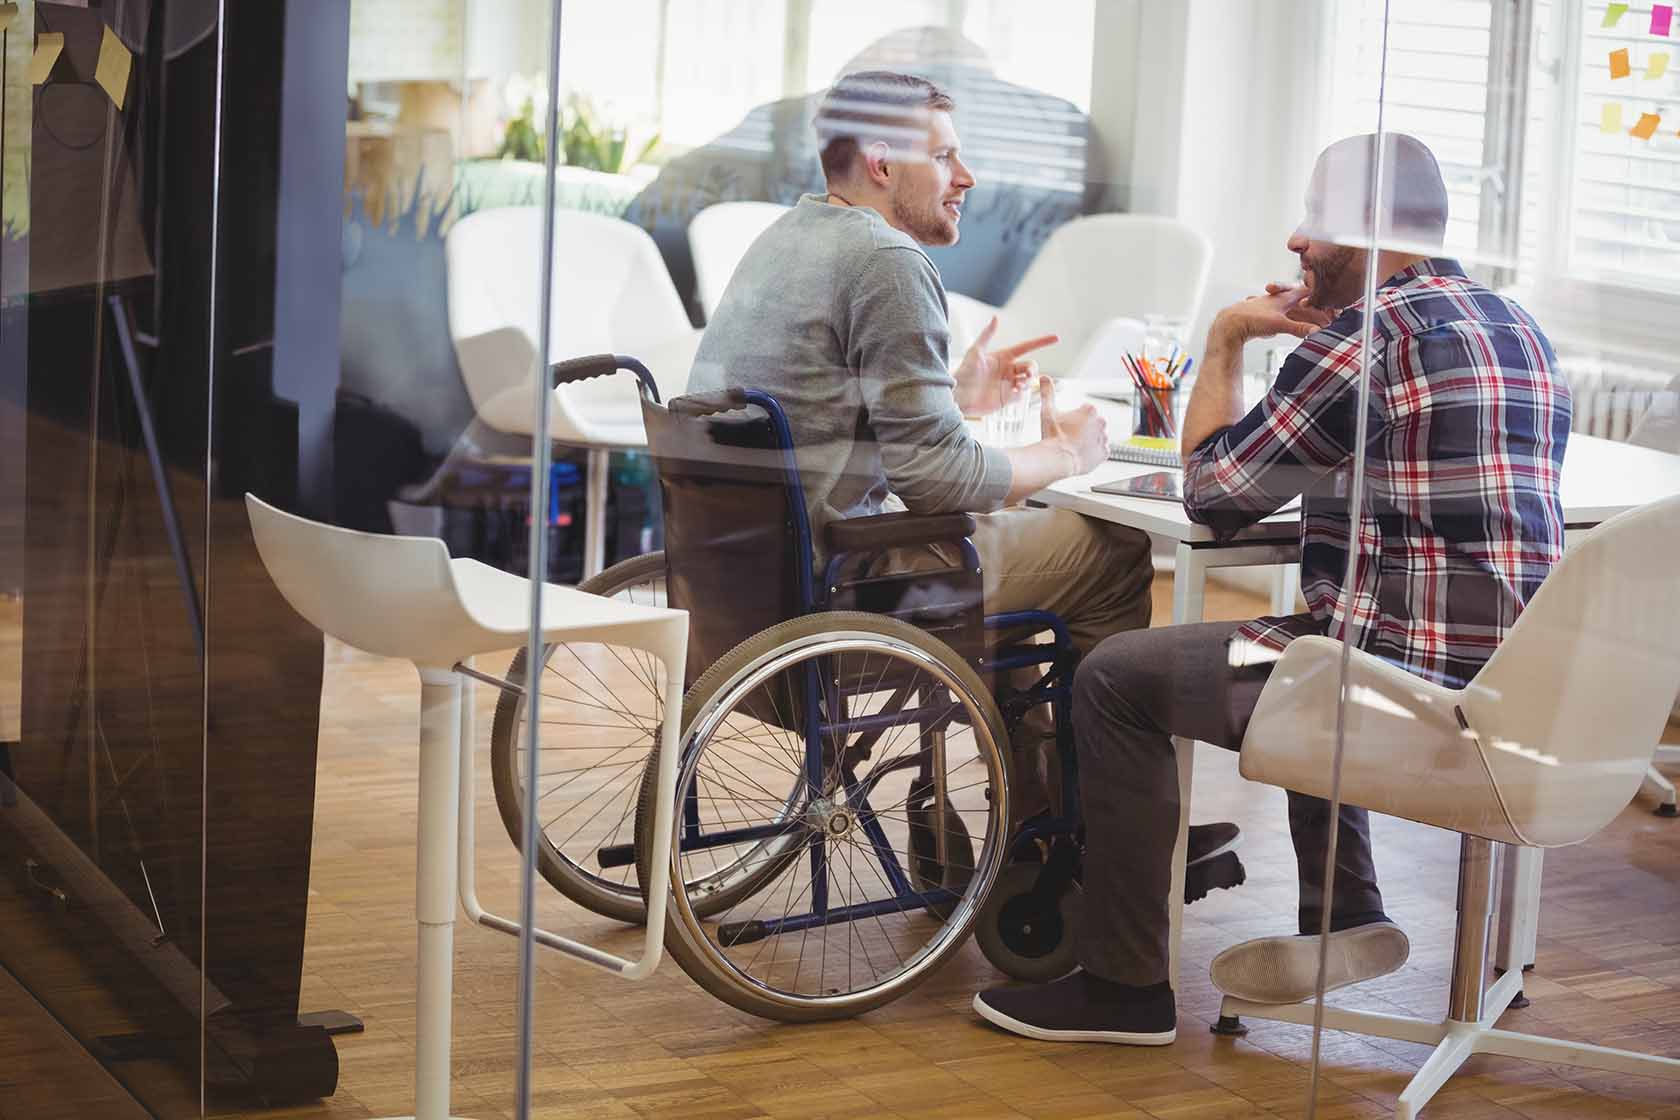 Man in a wheelchair talking to another man at a table in a conference room